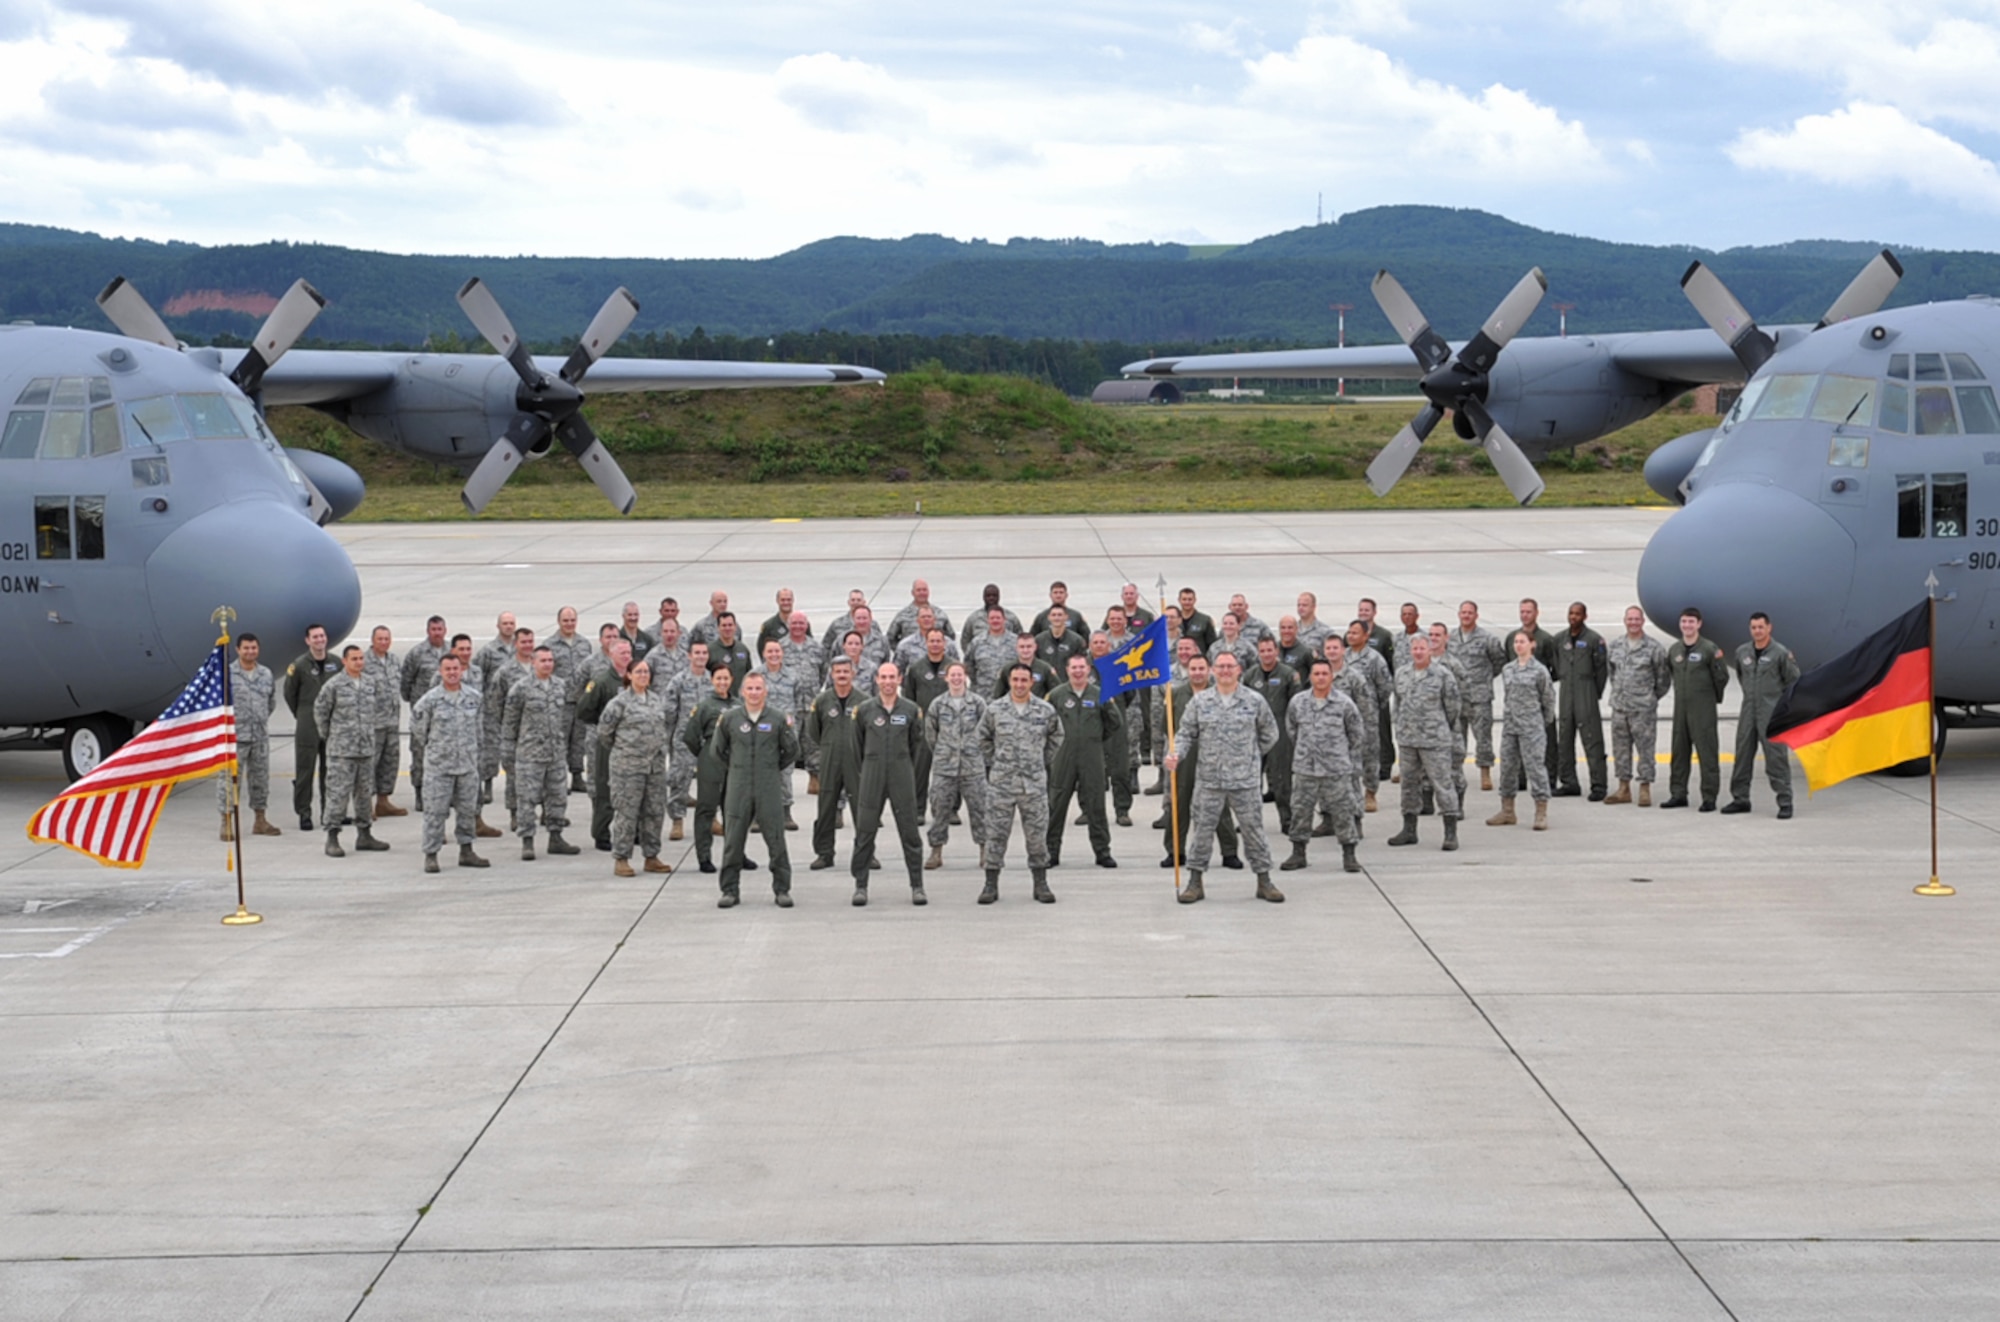 The 38th Expeditionary Airlift Squadron pose for a group photo on the flightline, Ramstein Air Base, Germany, Aug. 11, 2010. The squadon, which is made up of Air Force Reserve and Air National Guard personnel, will end their tour here on 15 Sept. after more than 20 years in Germany. (U.S. Air Force photo by Senior Airman Tony R. Ritter)